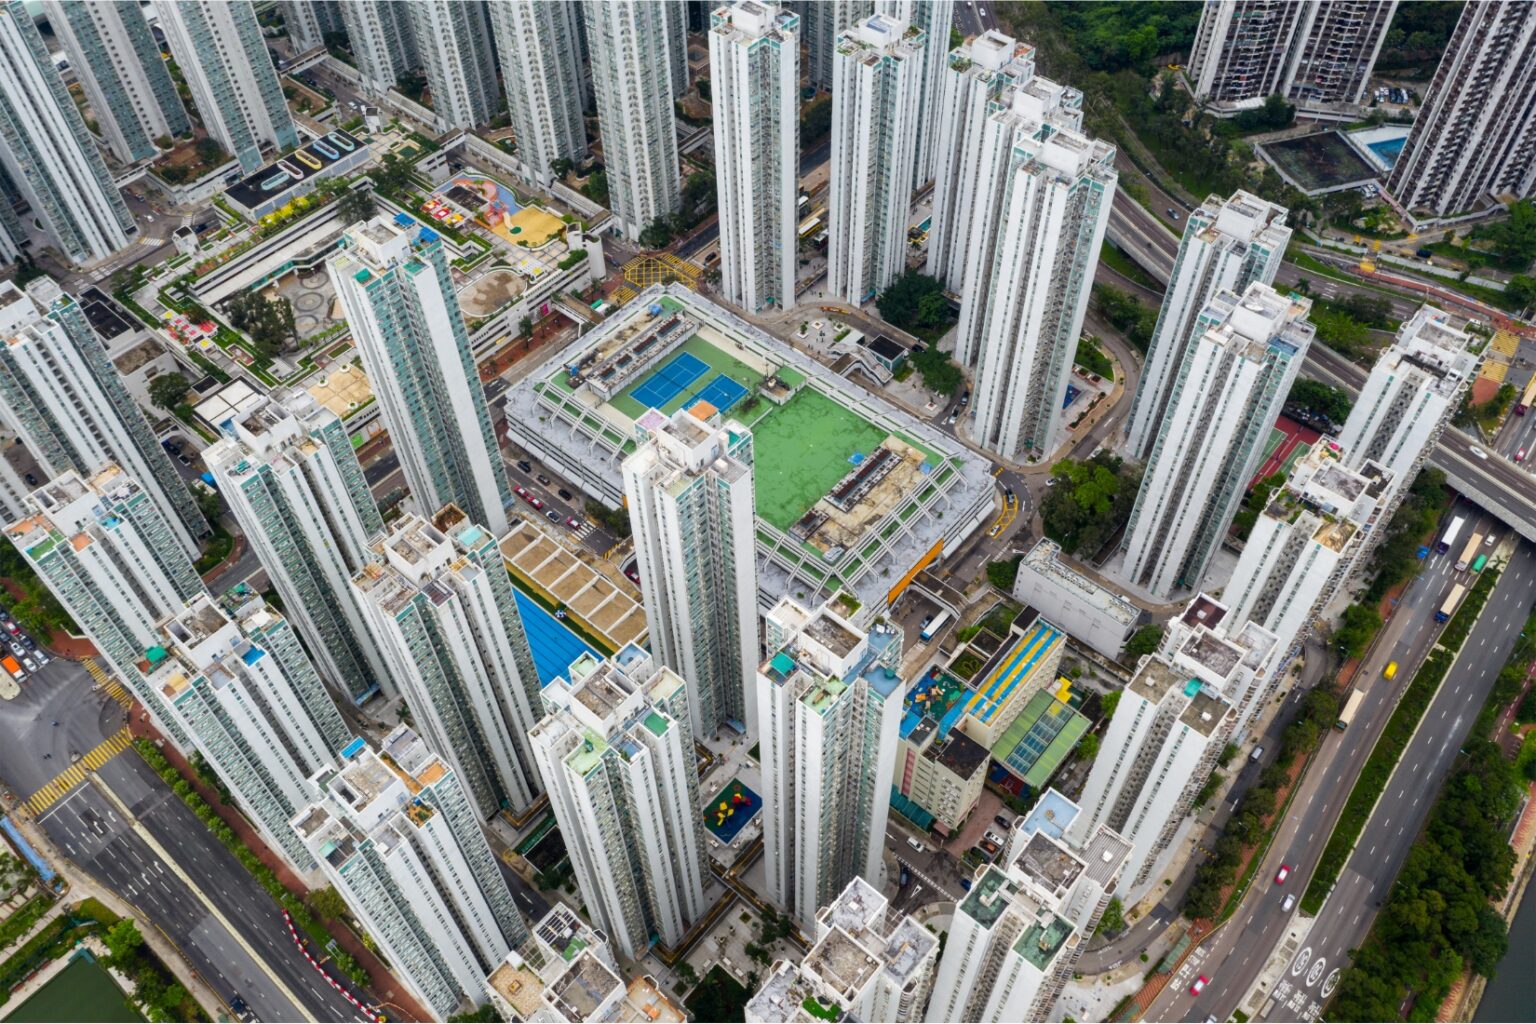 Hong Kong private home prices 2nd most expensive in Asia